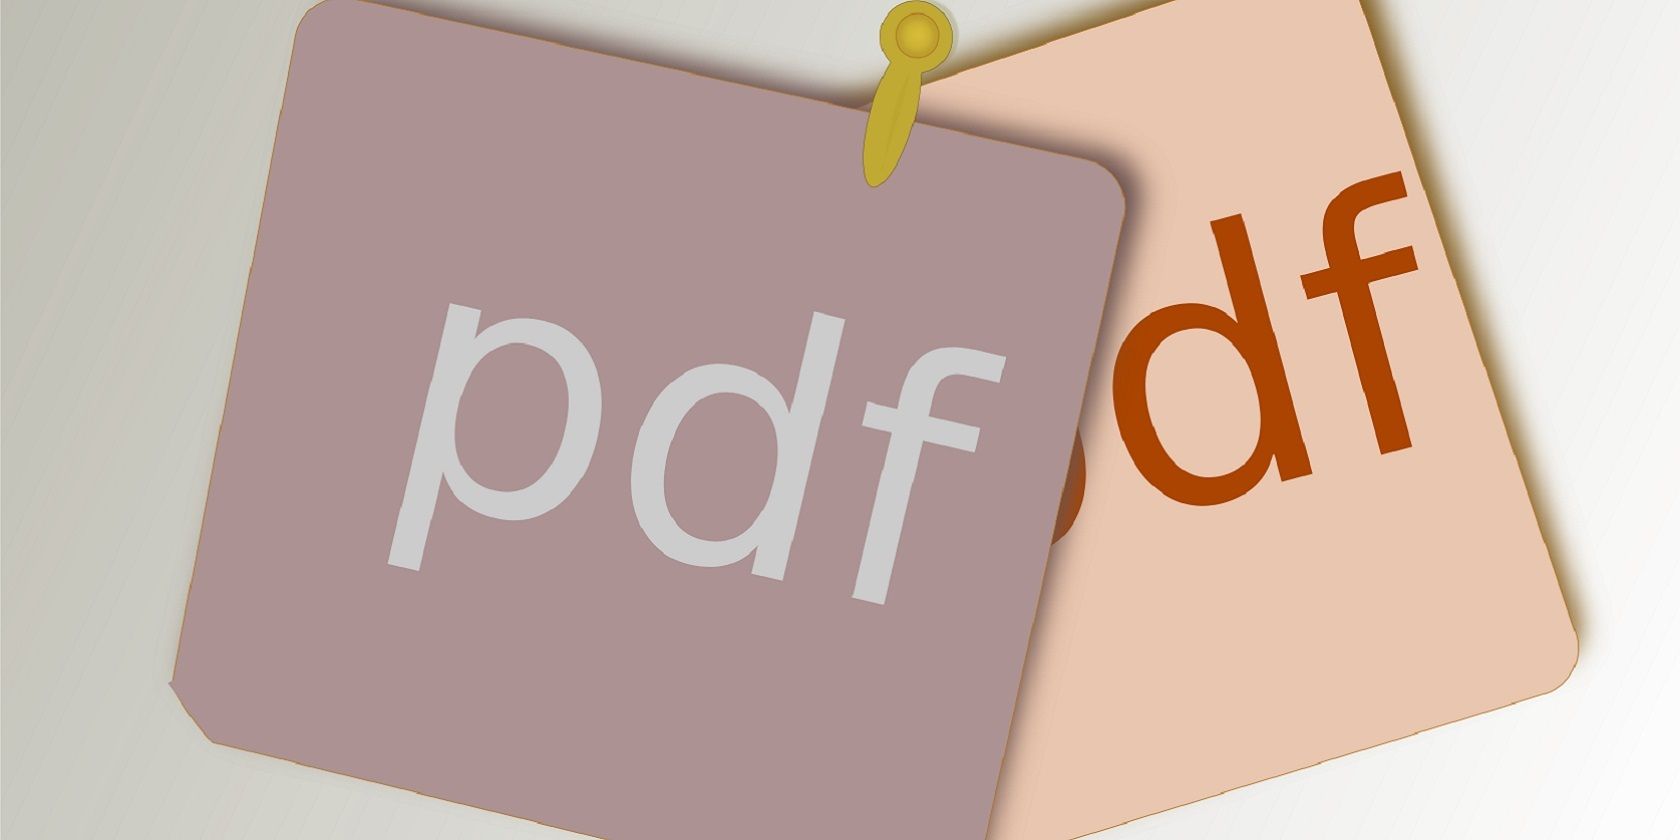 combine pdfs together